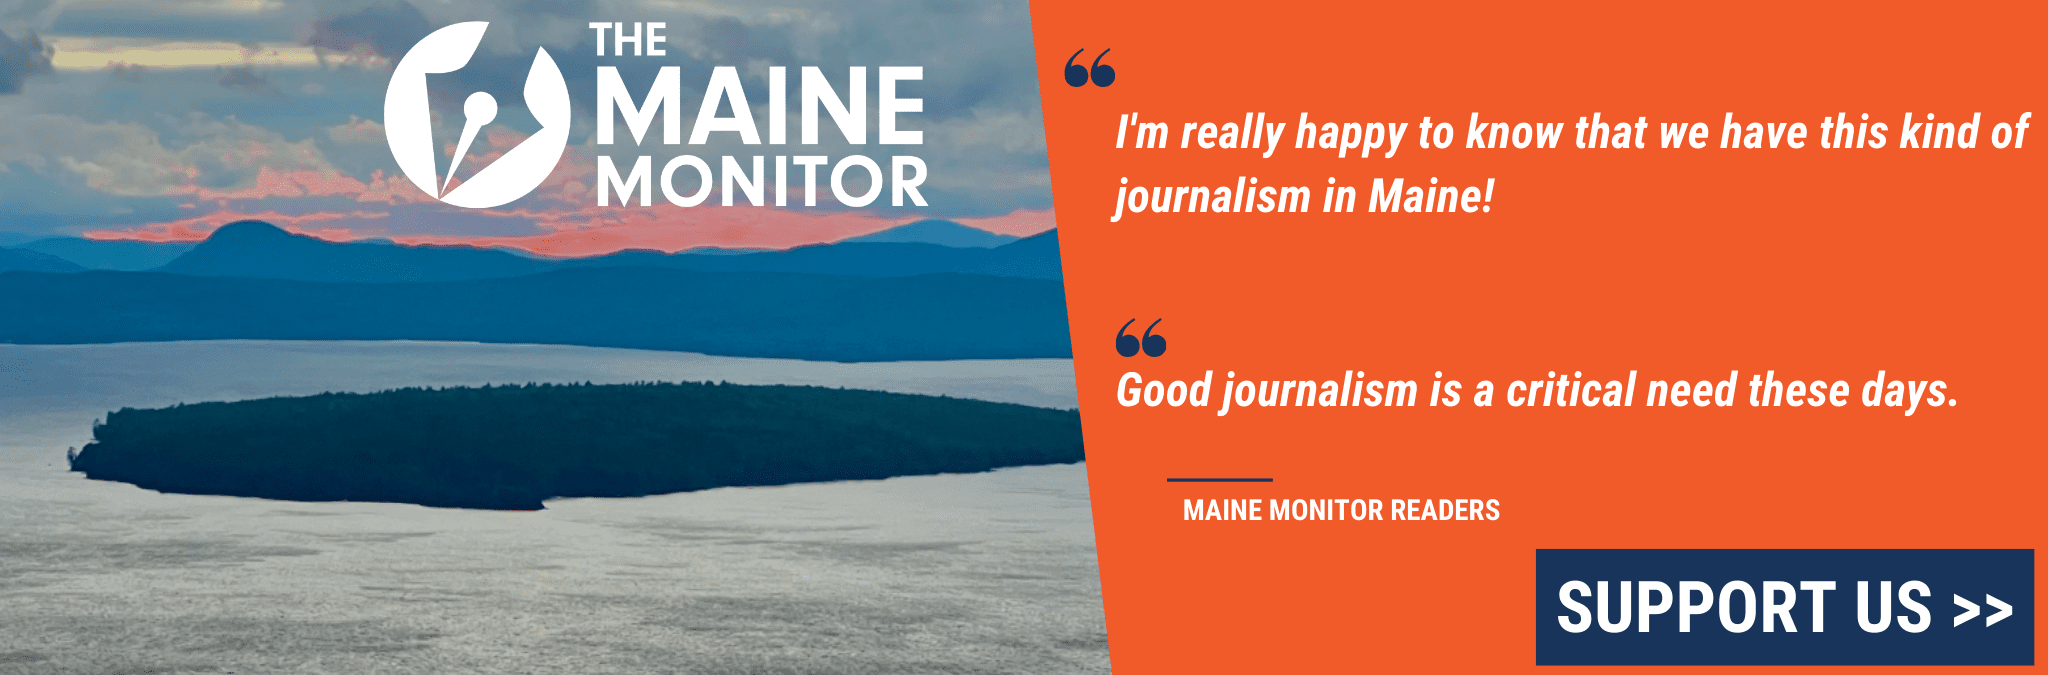 A graphic seeking donations. A quote from two Maine Monitor readers. The first says "I'm really happy to know that we have this kind of journalism in Maine!" The second says "Good journalism is a critical need these days." Also shown is a photo of an island off Maine's coast, the Maine Monitor logo and a support us button.